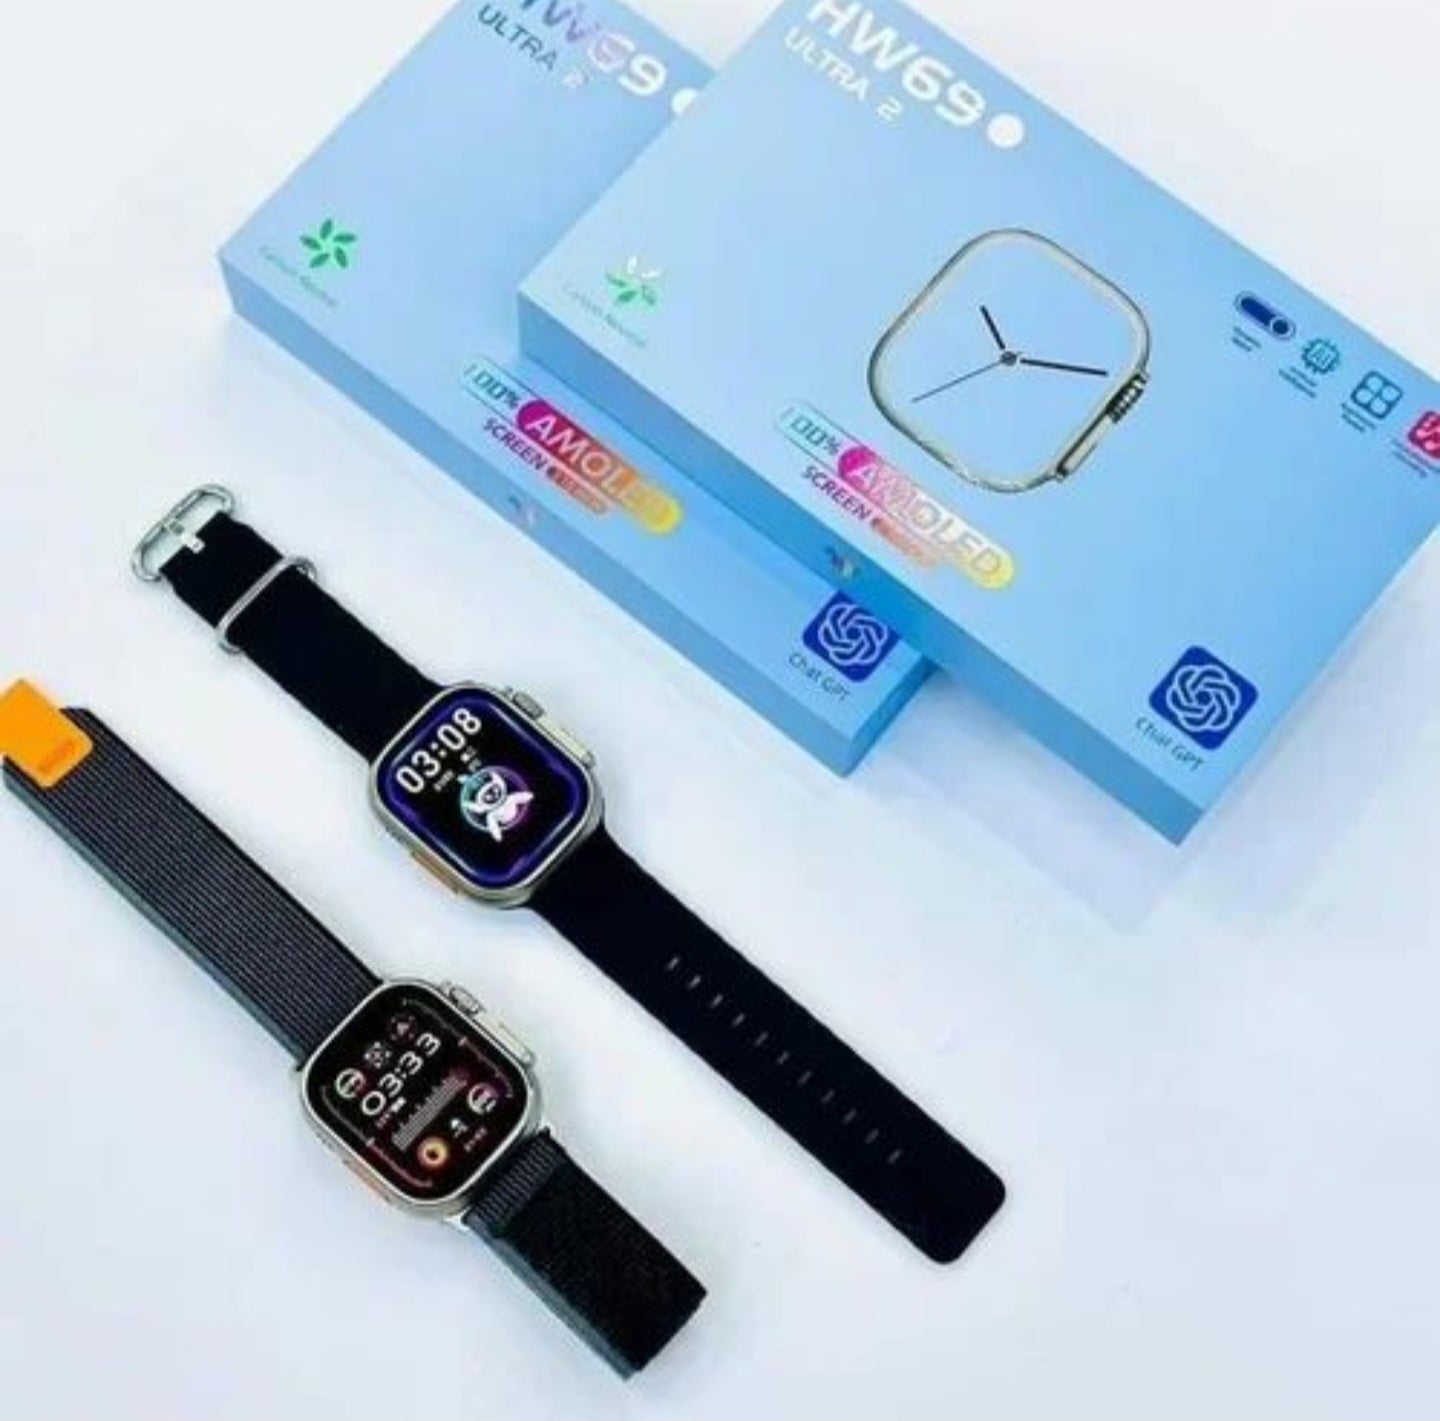 HK9 Ultra 2 SmartWatch with Amoled Screen